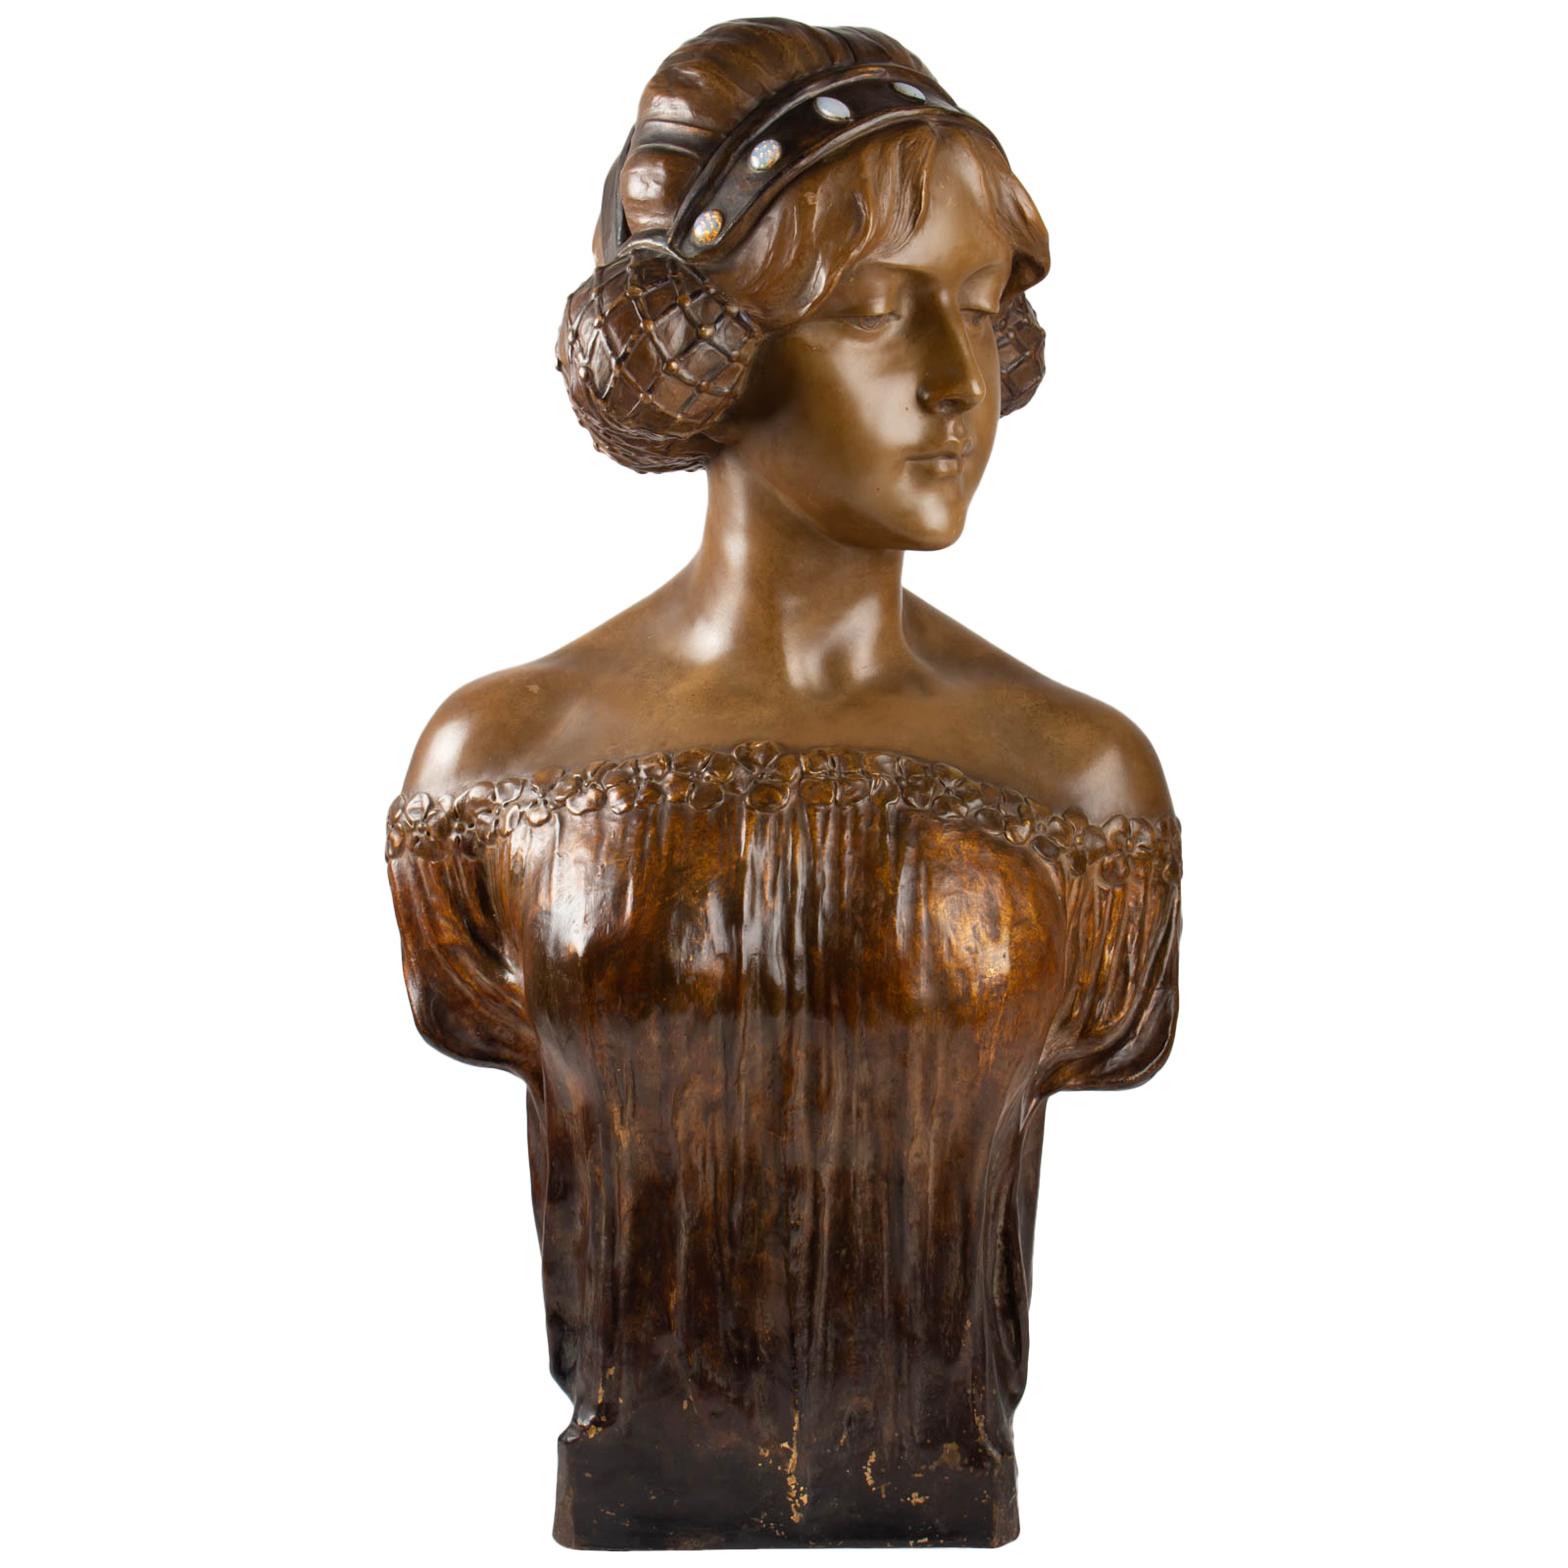 Bust of Goldscheider ‘1845-1897’ in Polychrome Terracotta, Large Format